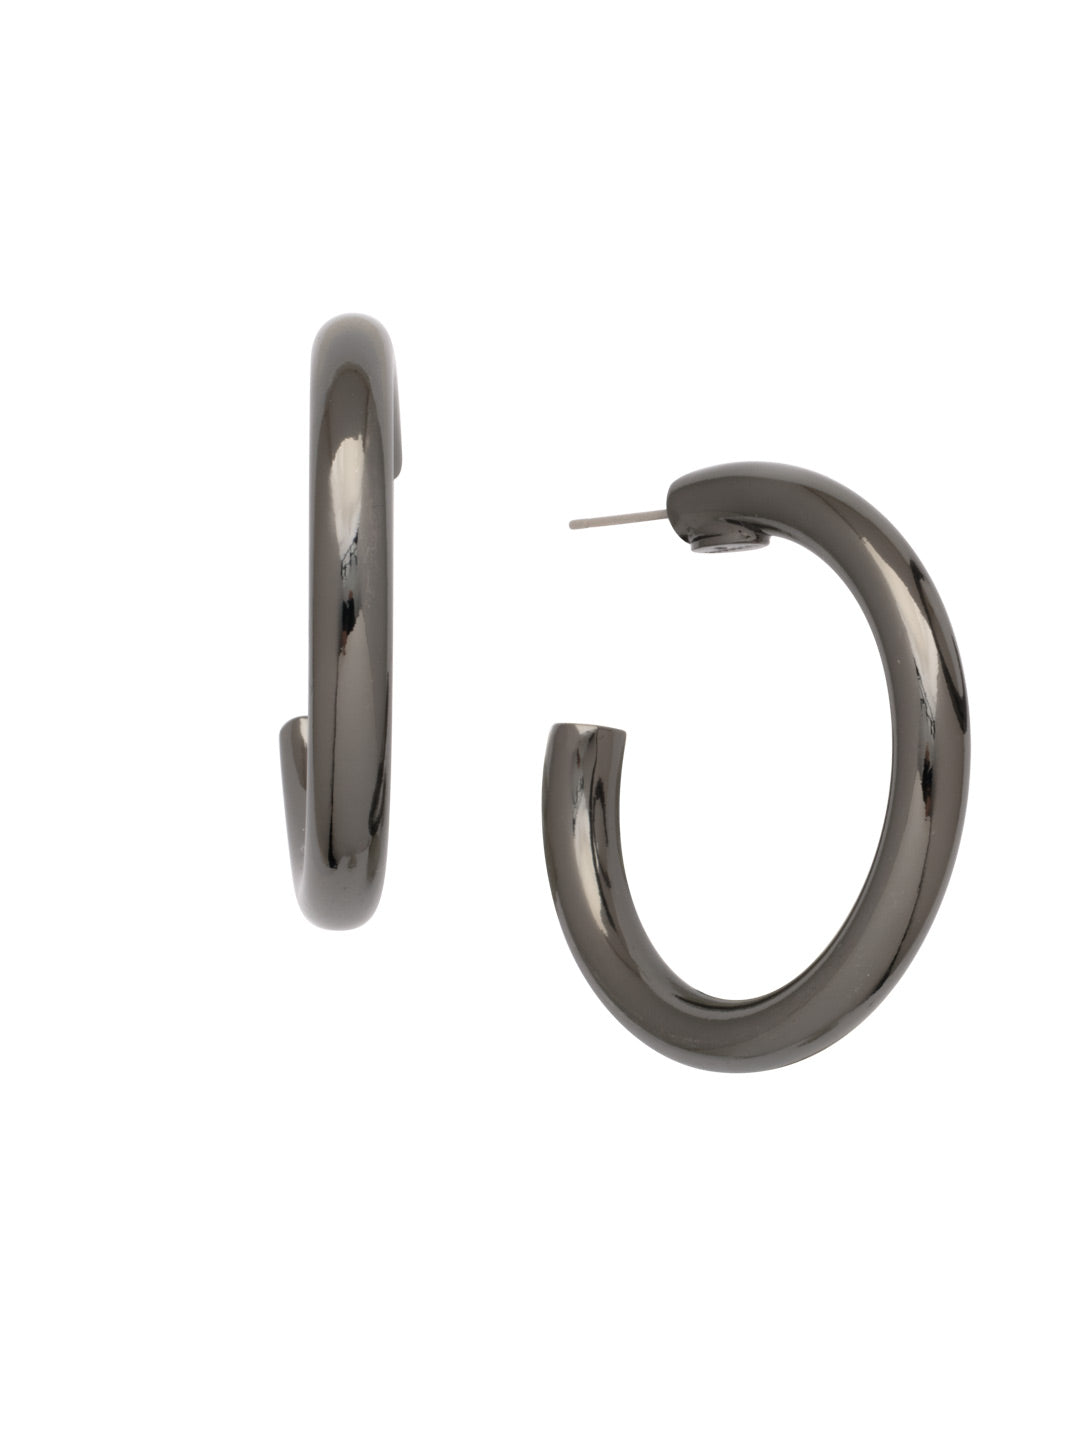 Keeley Hoop Earrings - 4EFF1GMMTL - <p>The Keeley Hoop Earrings are your next wardrobe staple! These everyday hoops are lightweight and comfortable, with an open design and a monster back. From Sorrelli's Bare Metallic collection in our Gun Metal finish.</p>